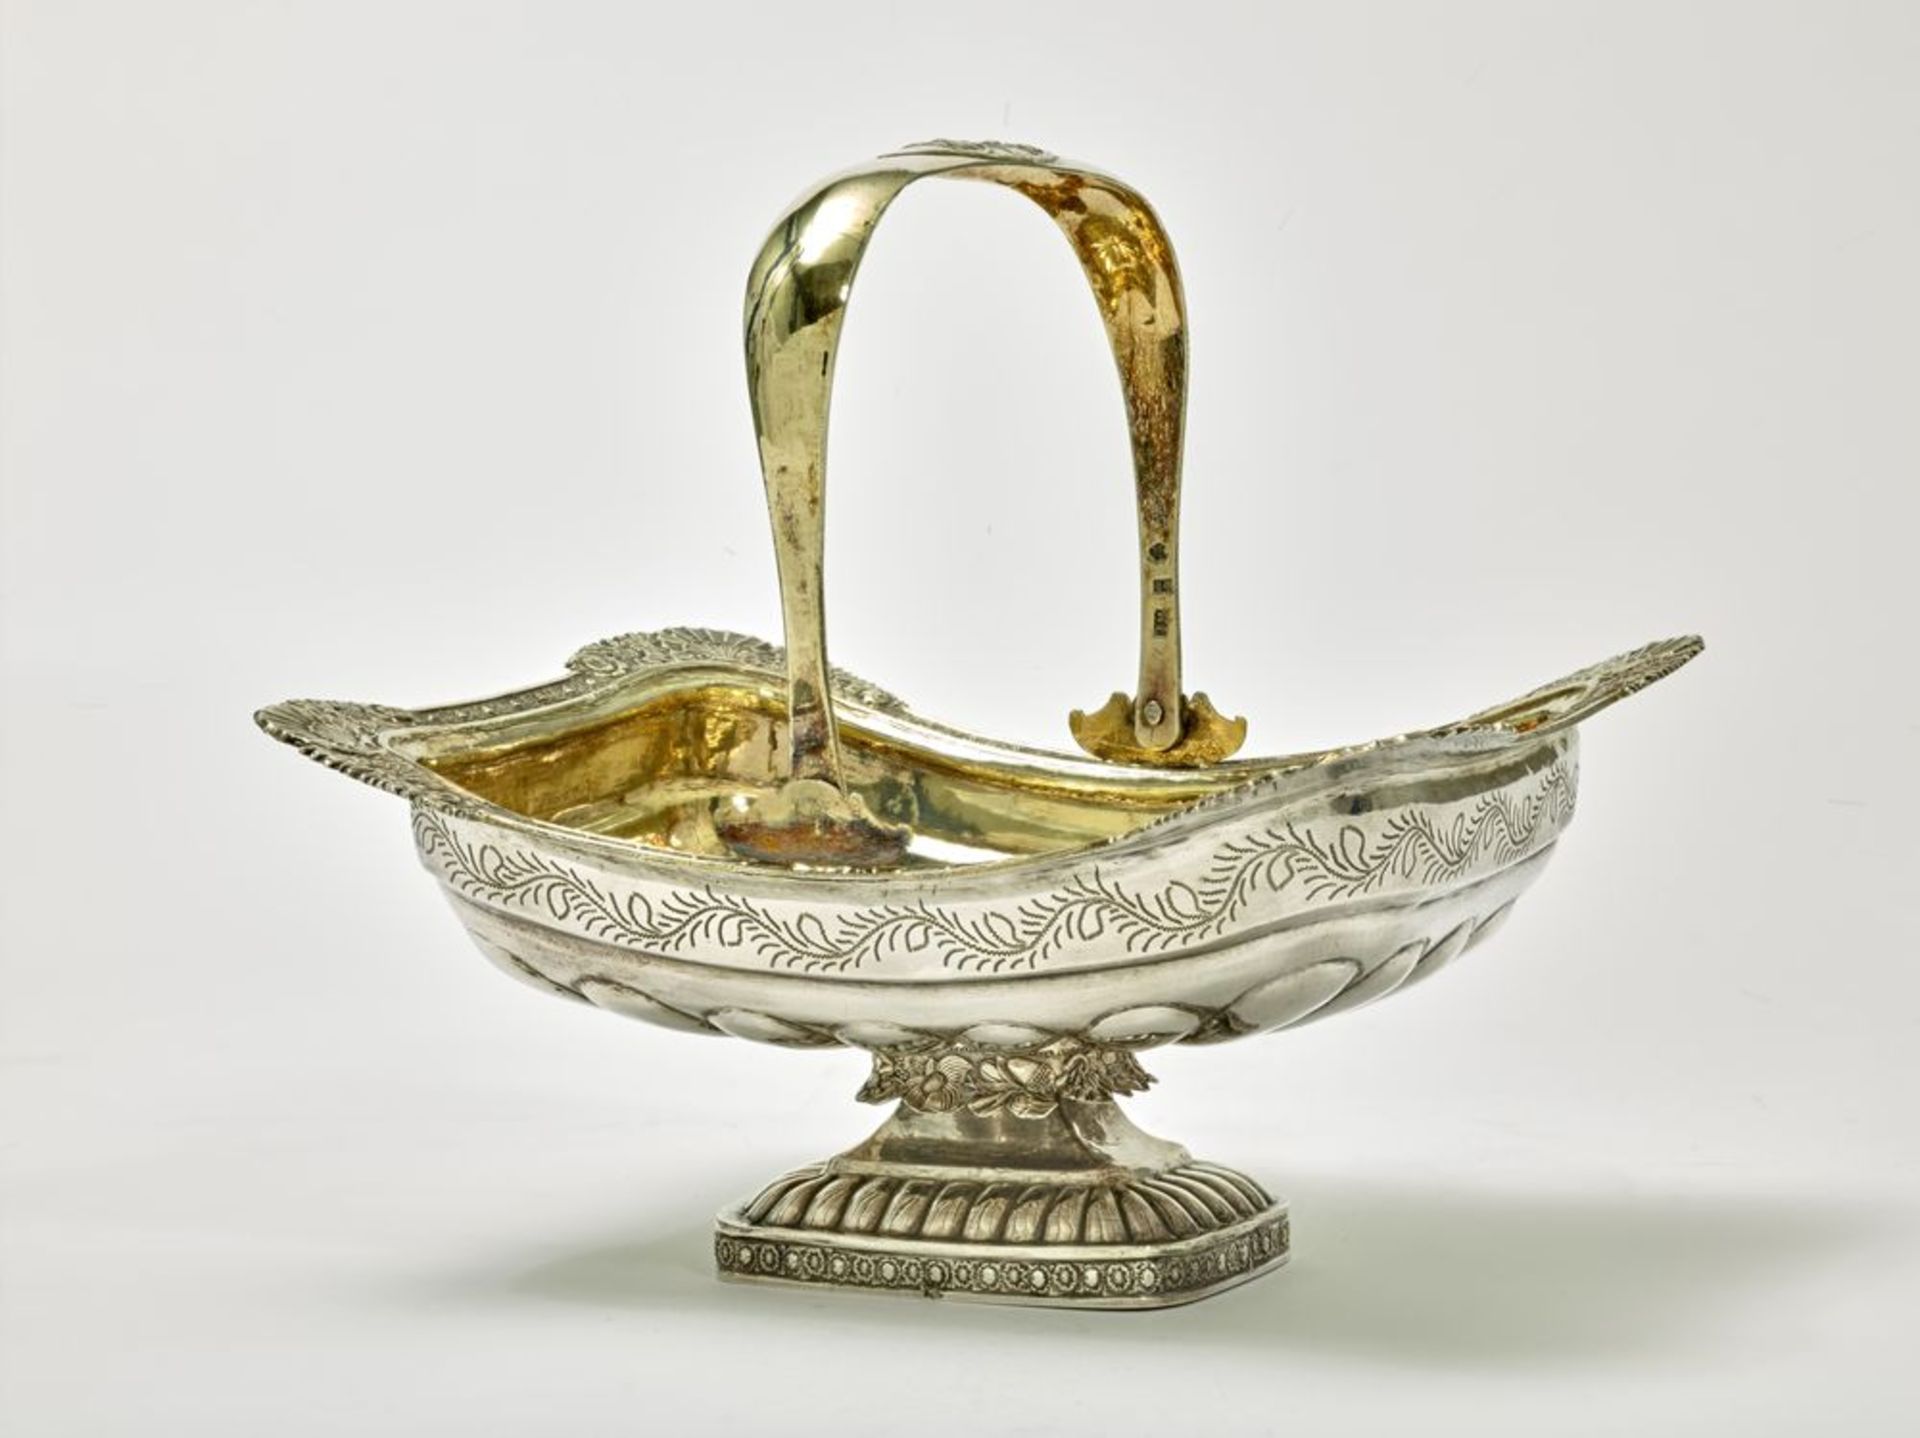 Silver-gilt candy bowl with a handle. Unidentified master, Russia, Moscow, 1833 - [...]